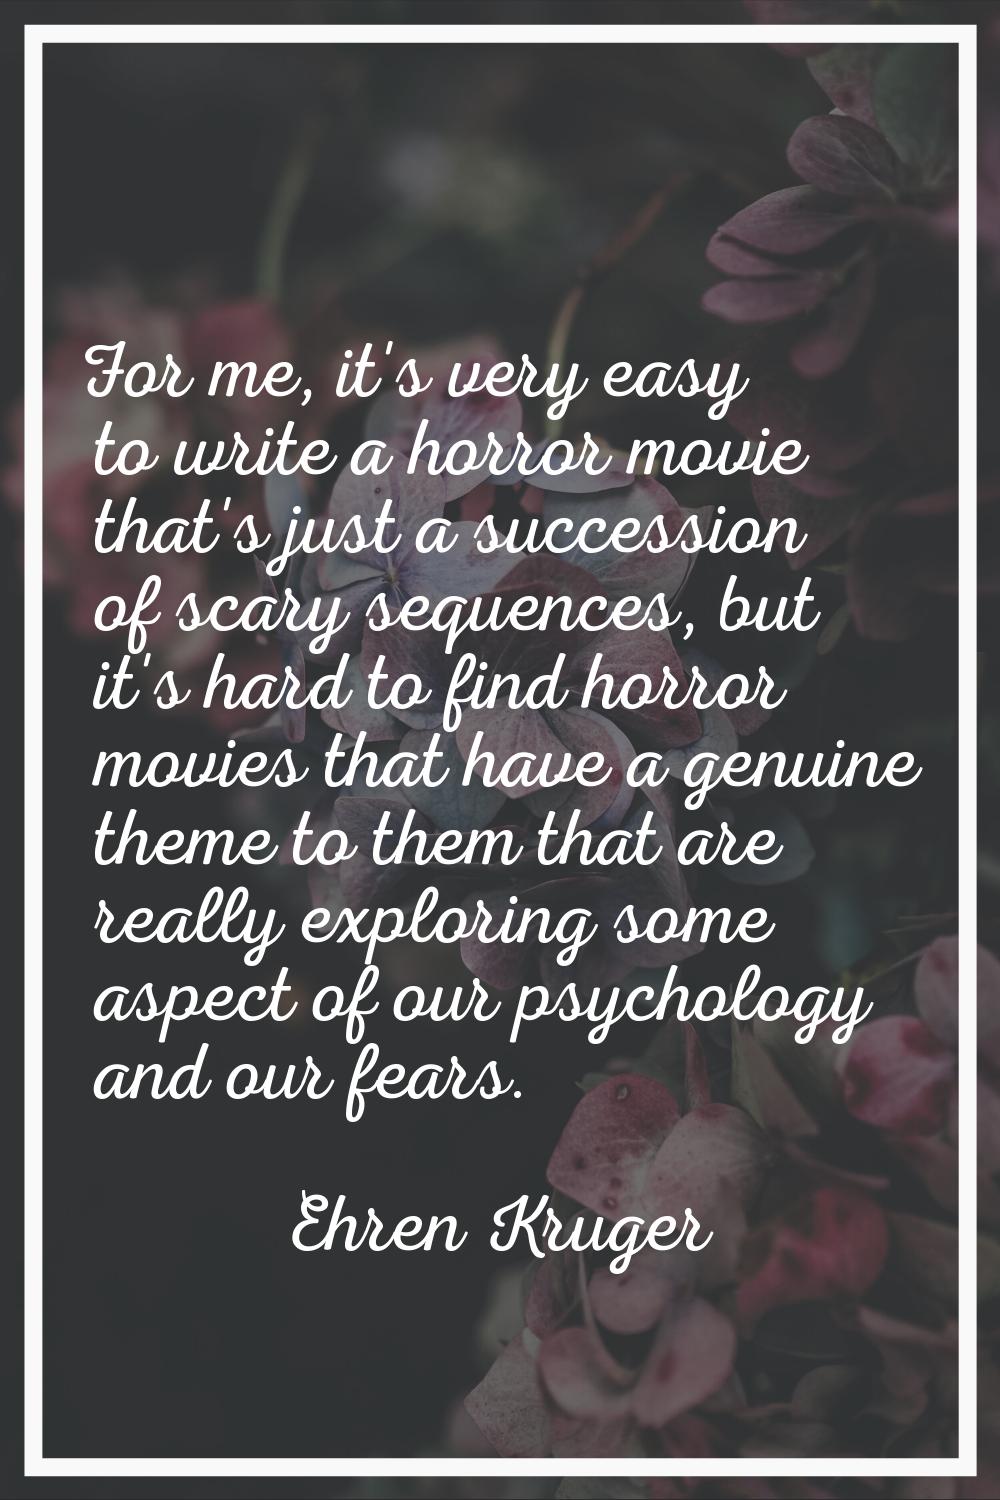 For me, it's very easy to write a horror movie that's just a succession of scary sequences, but it'